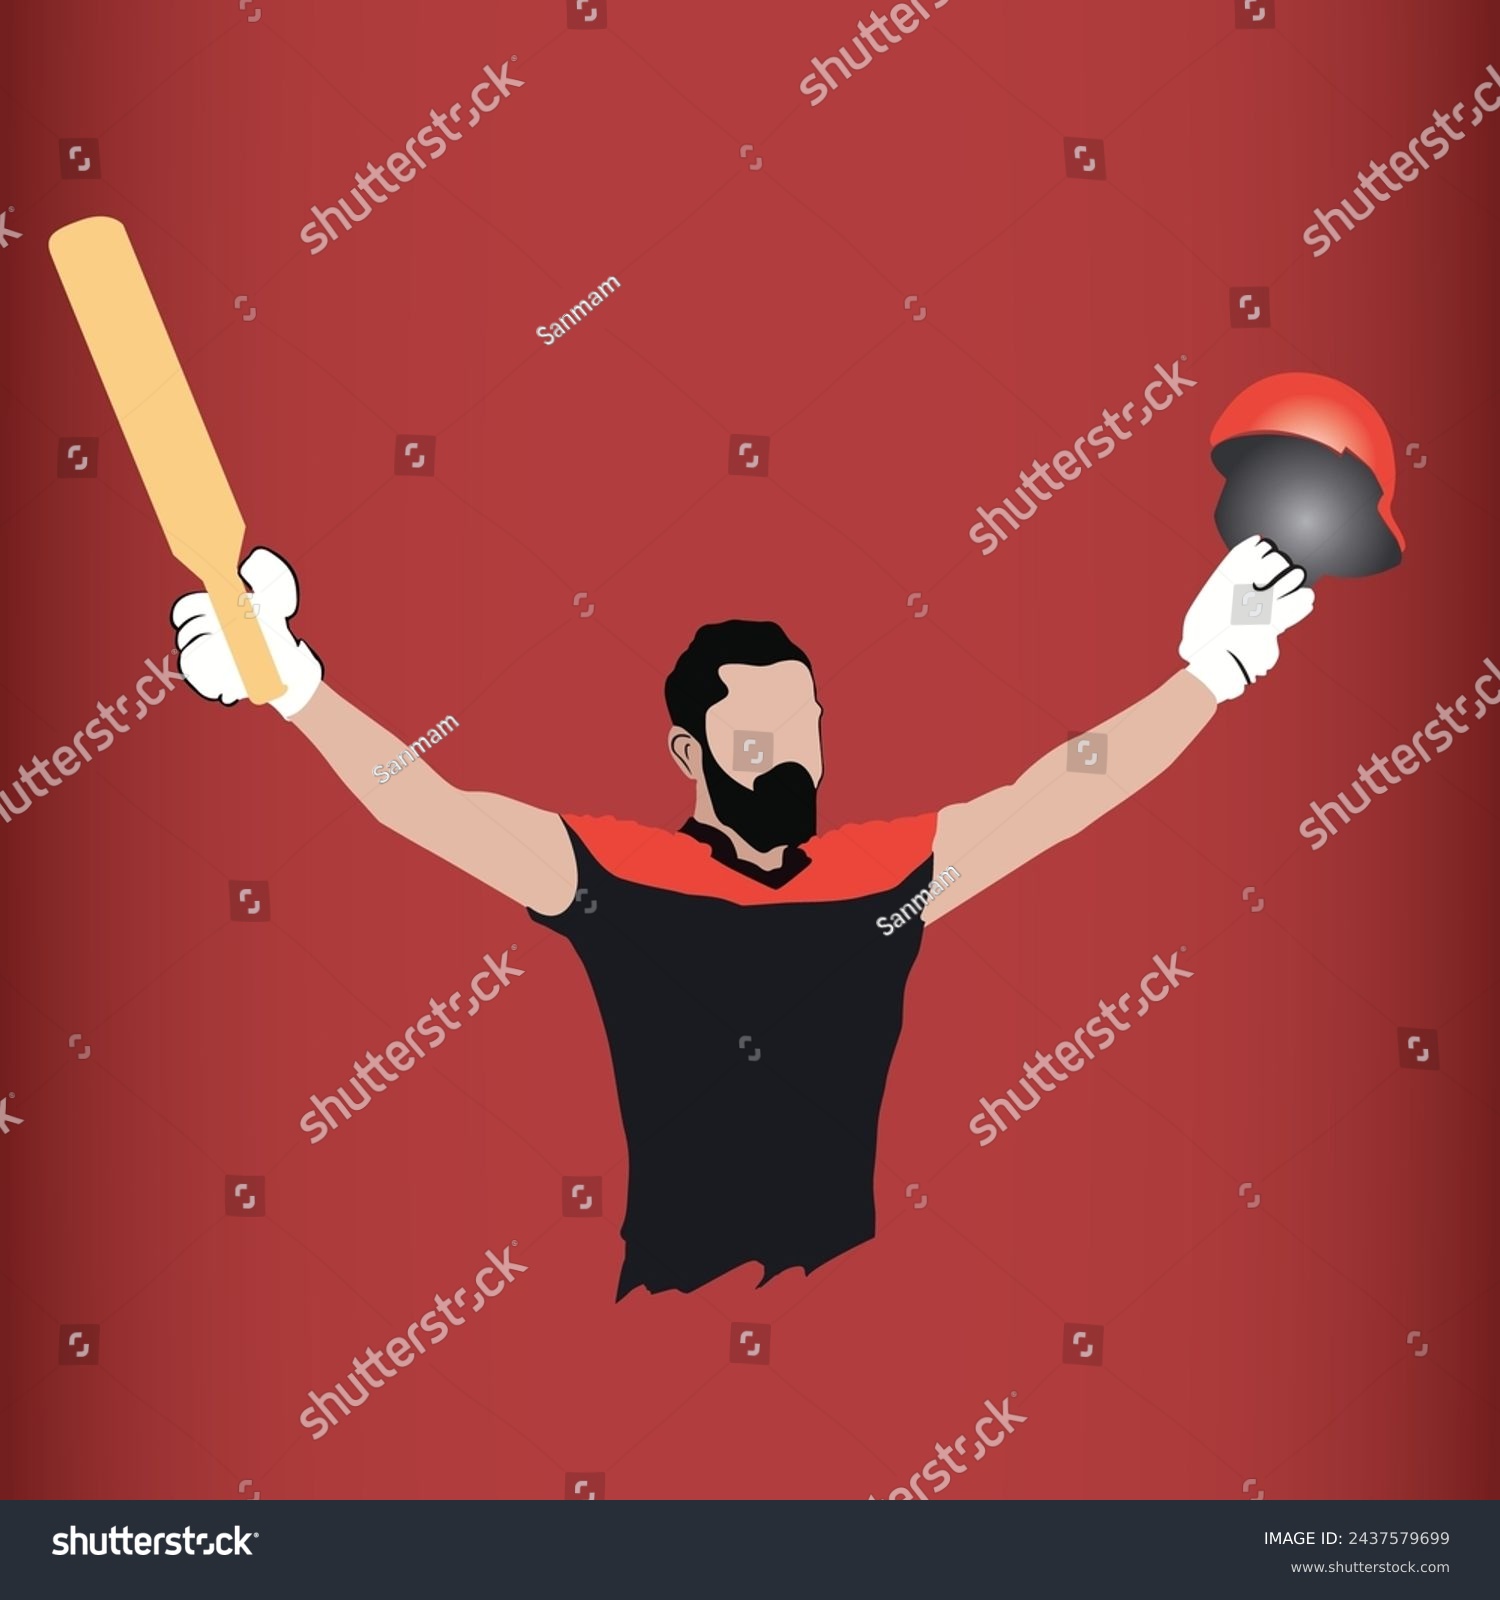 SVG of Indian cricket Player in red jersey vector Indian league cricket player svg